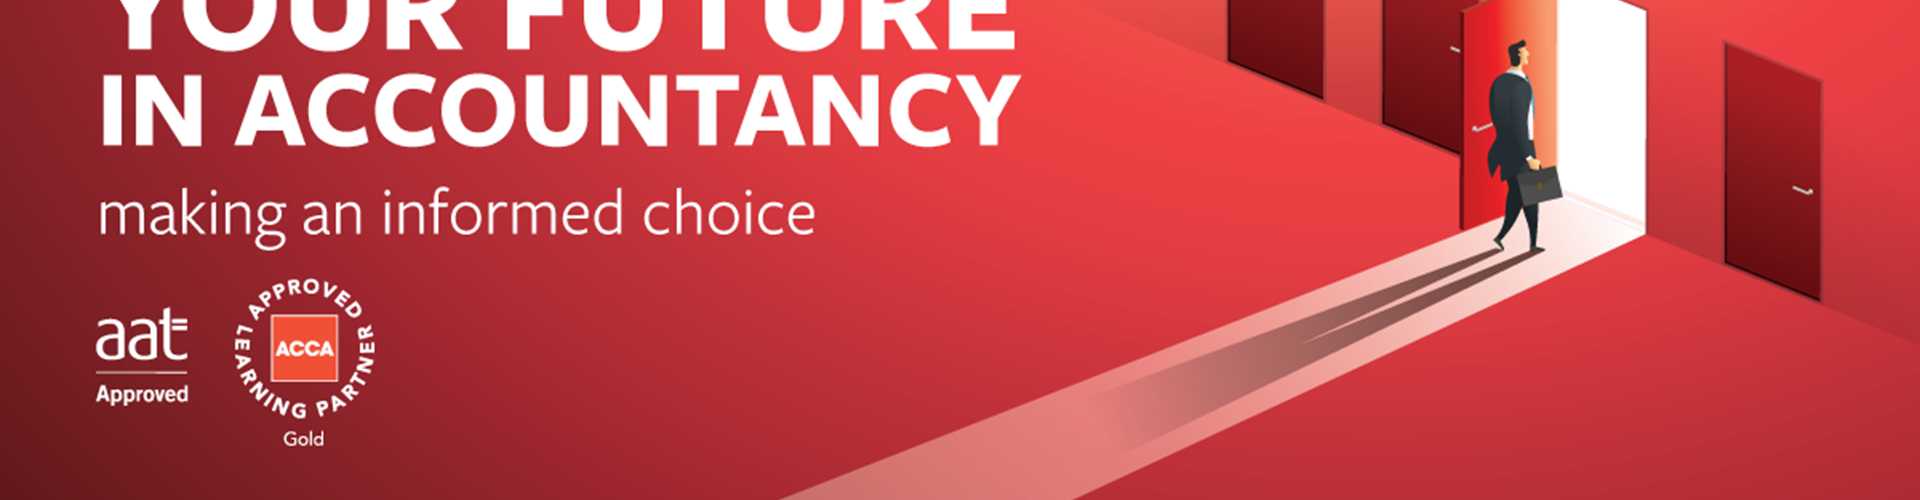 ‘Your Future in Accountancy’ Conference